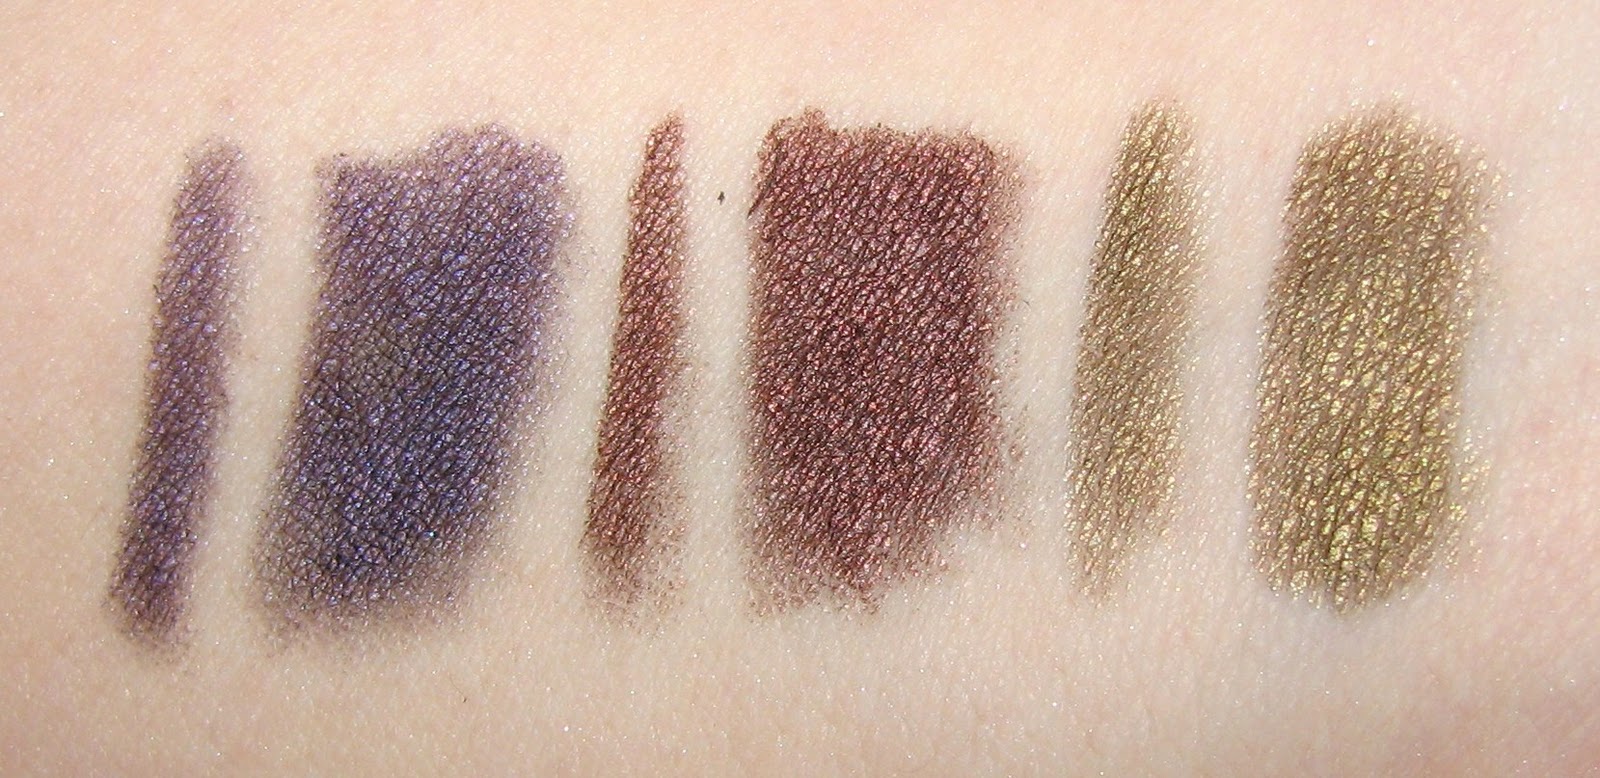 Chanel VIOLET SMOKE, BRUN, KHAKI DORE Le Crayon Yeux Precision Eye Definer  Swatches and Review - Blushing Noir